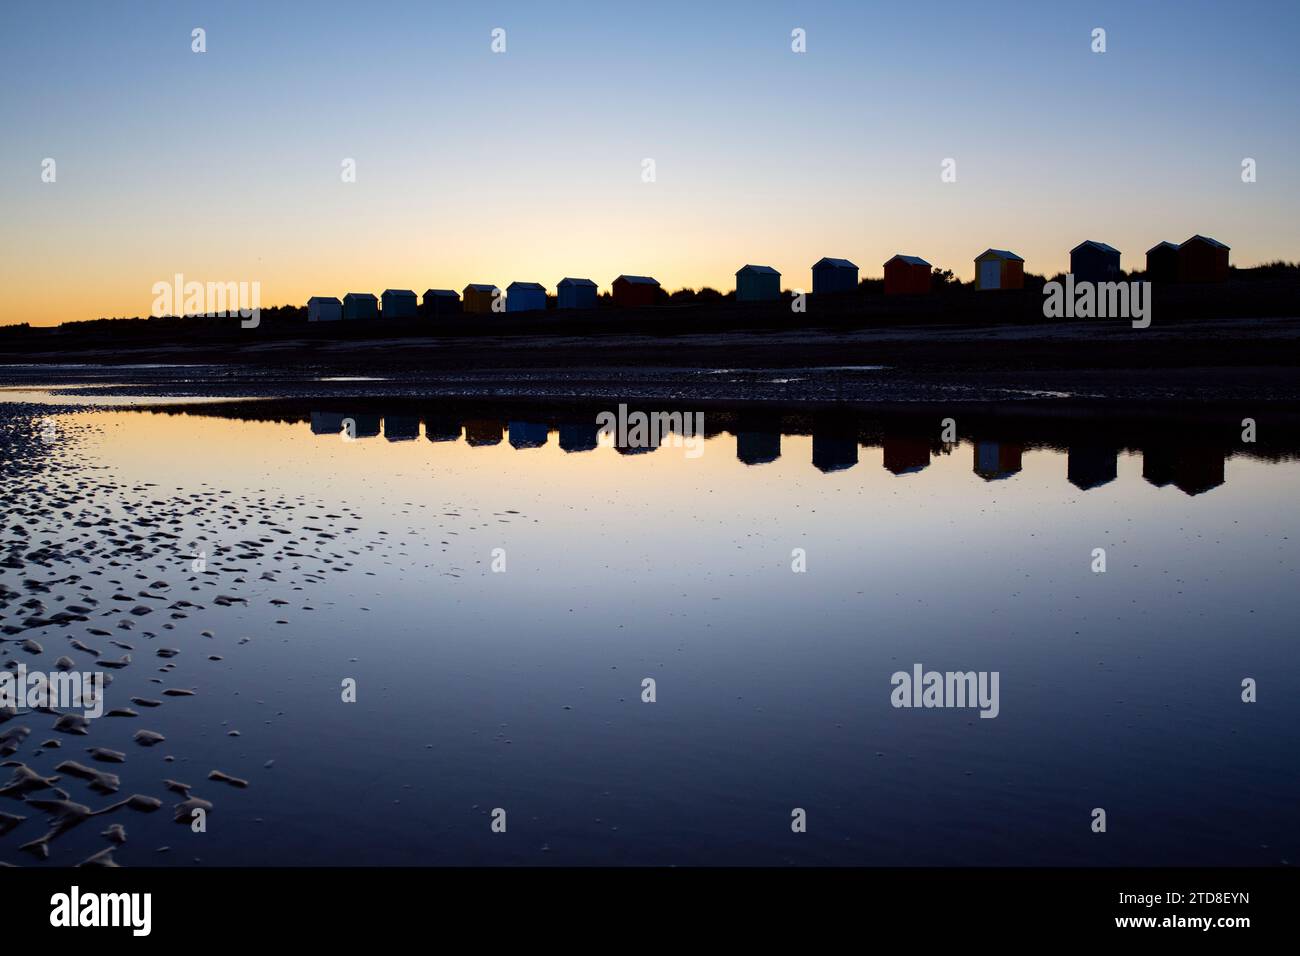 Findhorn Beach huts at dawn. Findhorn, Morayshire, Scotland. Silhouette Stock Photo